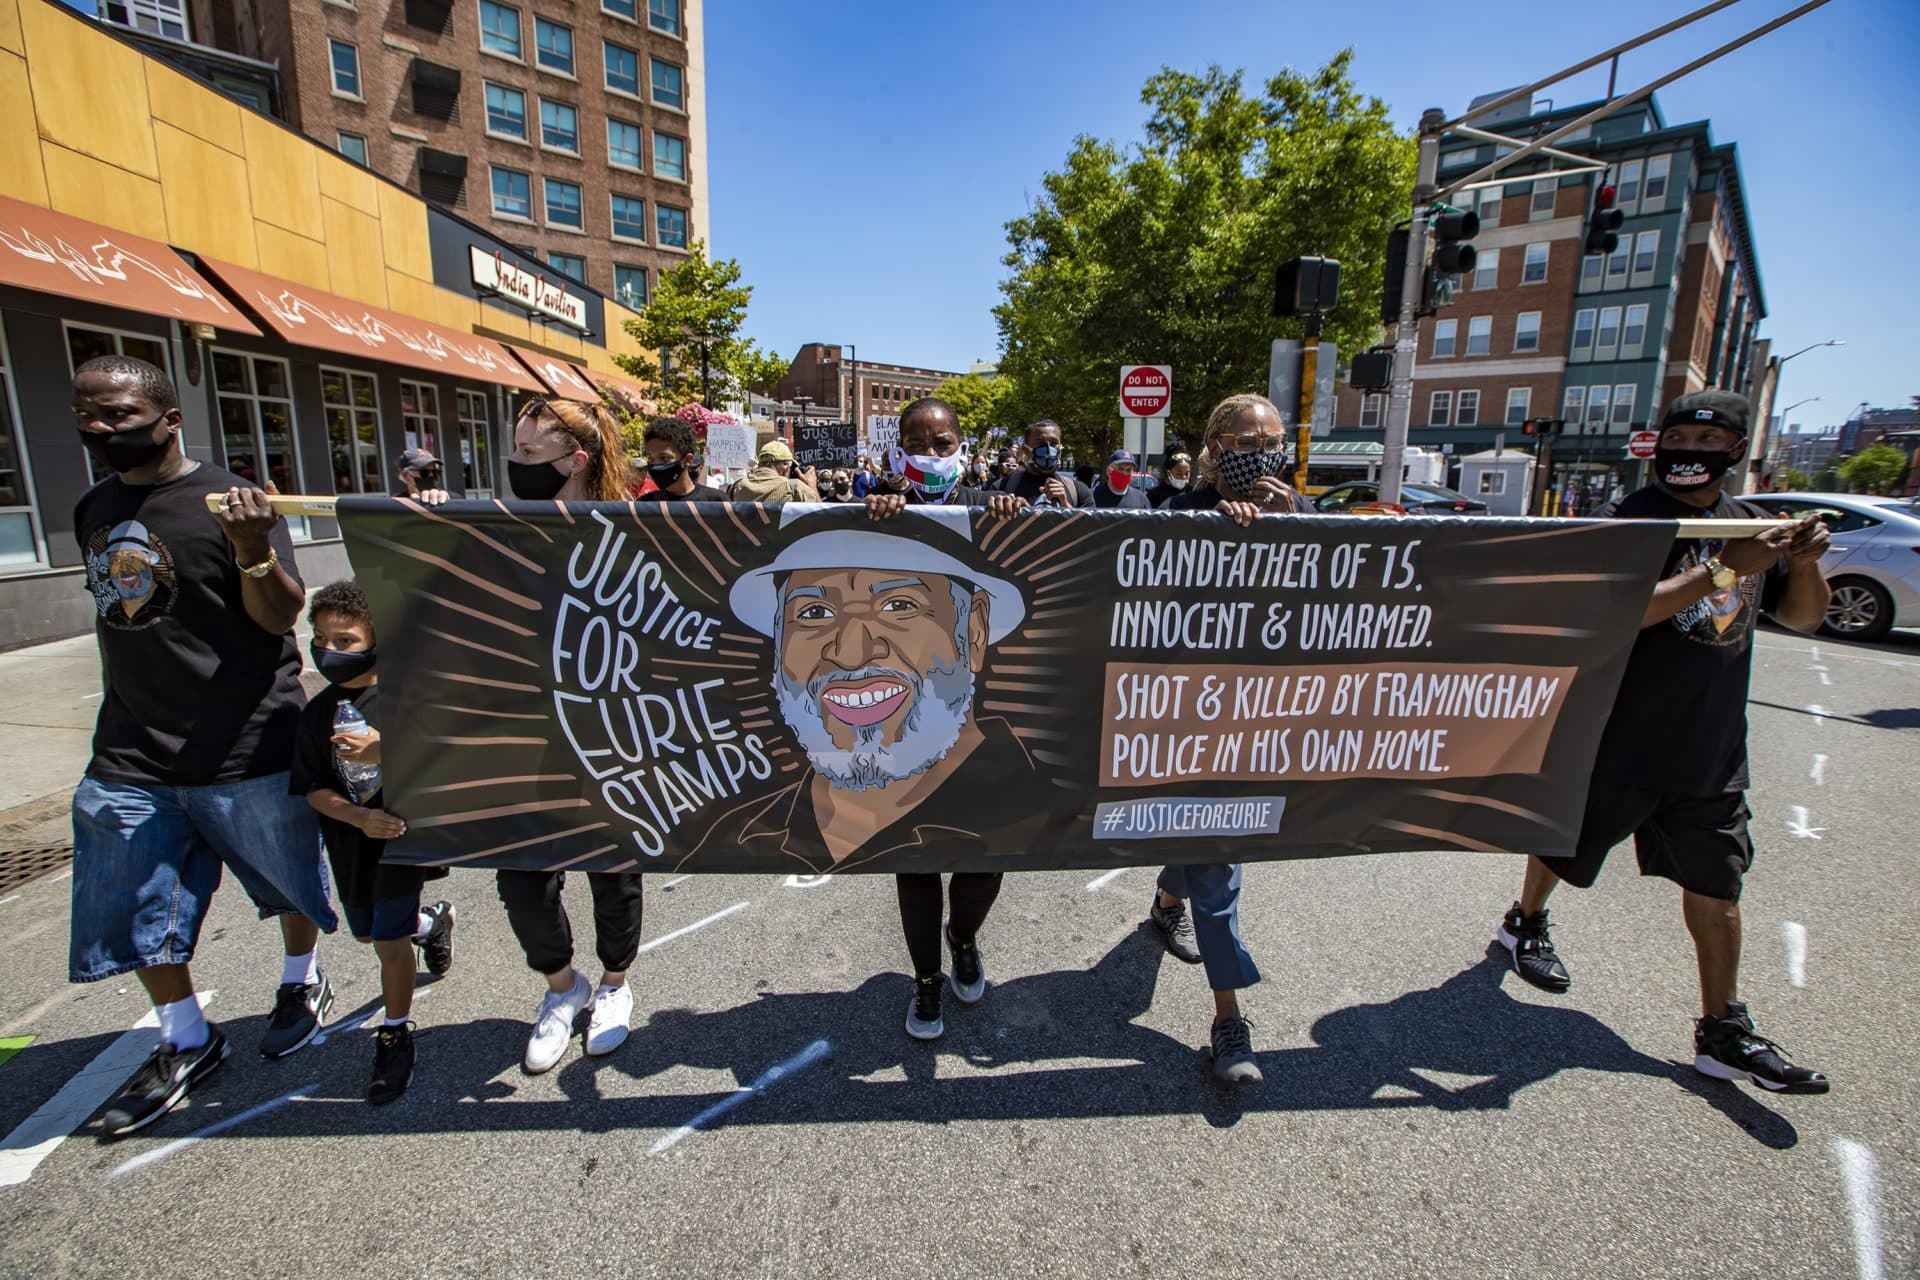 A &quot;Justice for Eurie [Stamps]&quot; march moves through Central Square in Cambridge on Aug. 1. Stamps grew up in Cambridge. He was killed by a Framingham police officer in 2011. (Jesse Costa/WBUR)